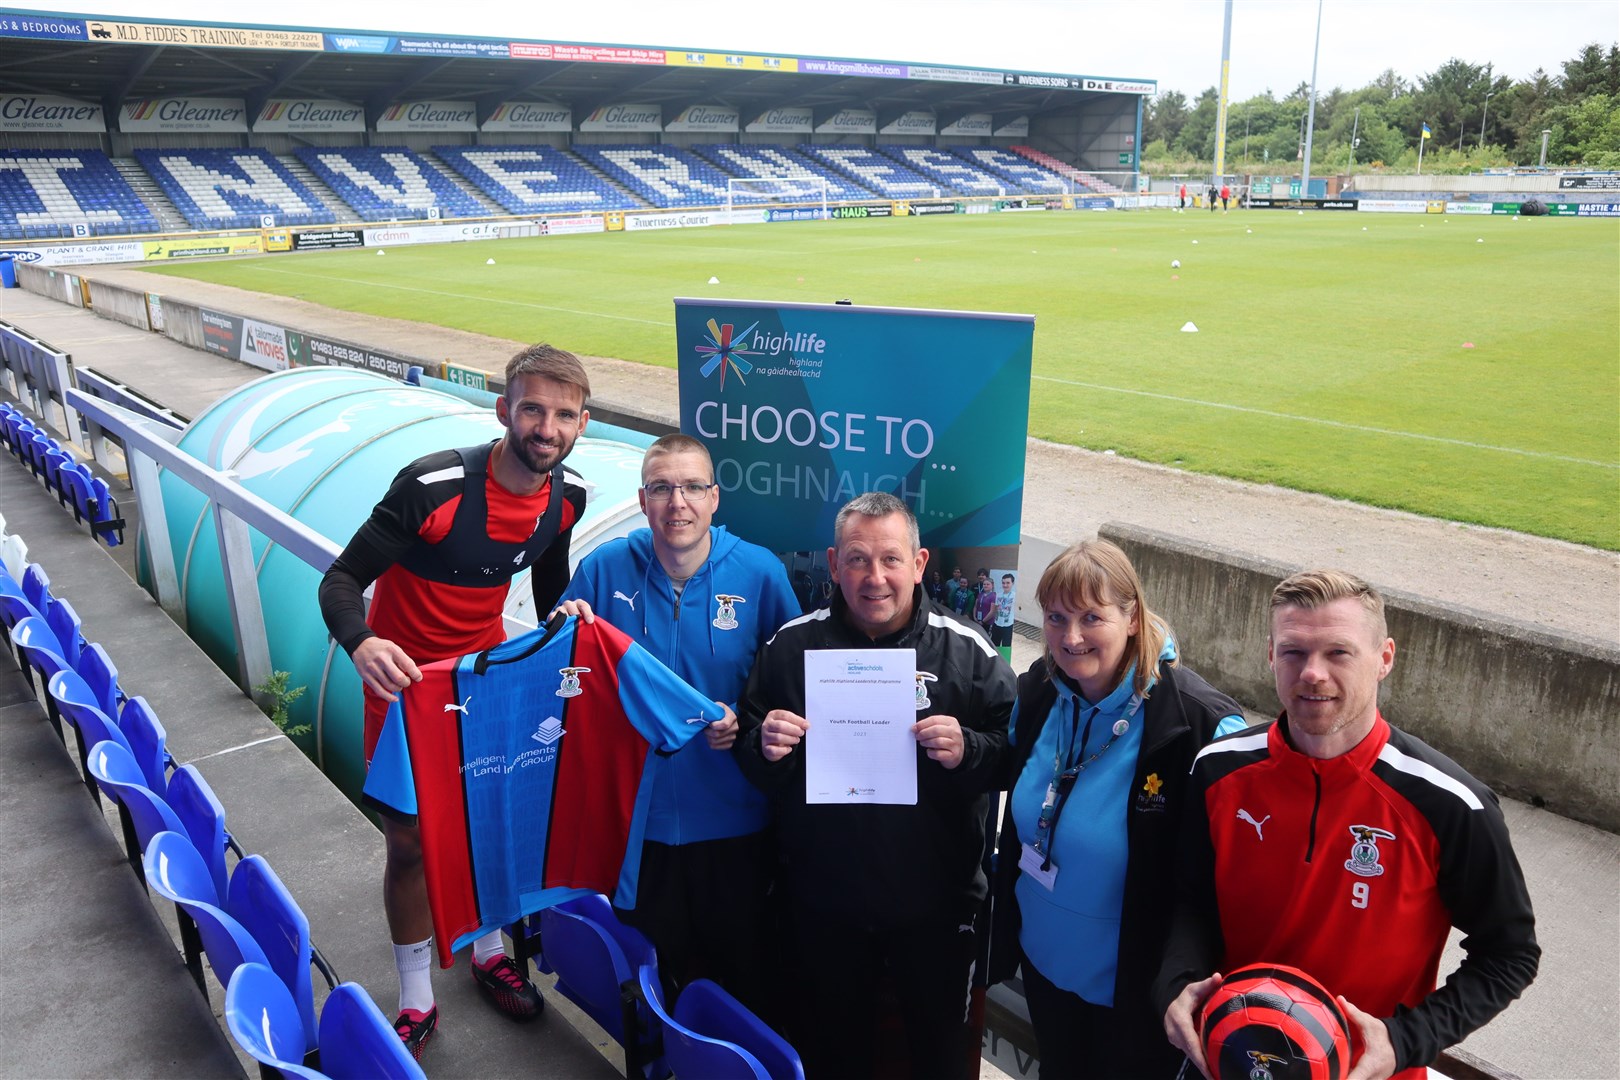 Inverness Caley Thistle are supporting Highlife Highland's leadership programme. L-R: Sean Welsh, Alyn Gunn, Billy Dodds, Elizabeth McDonald and Billy Mckay.